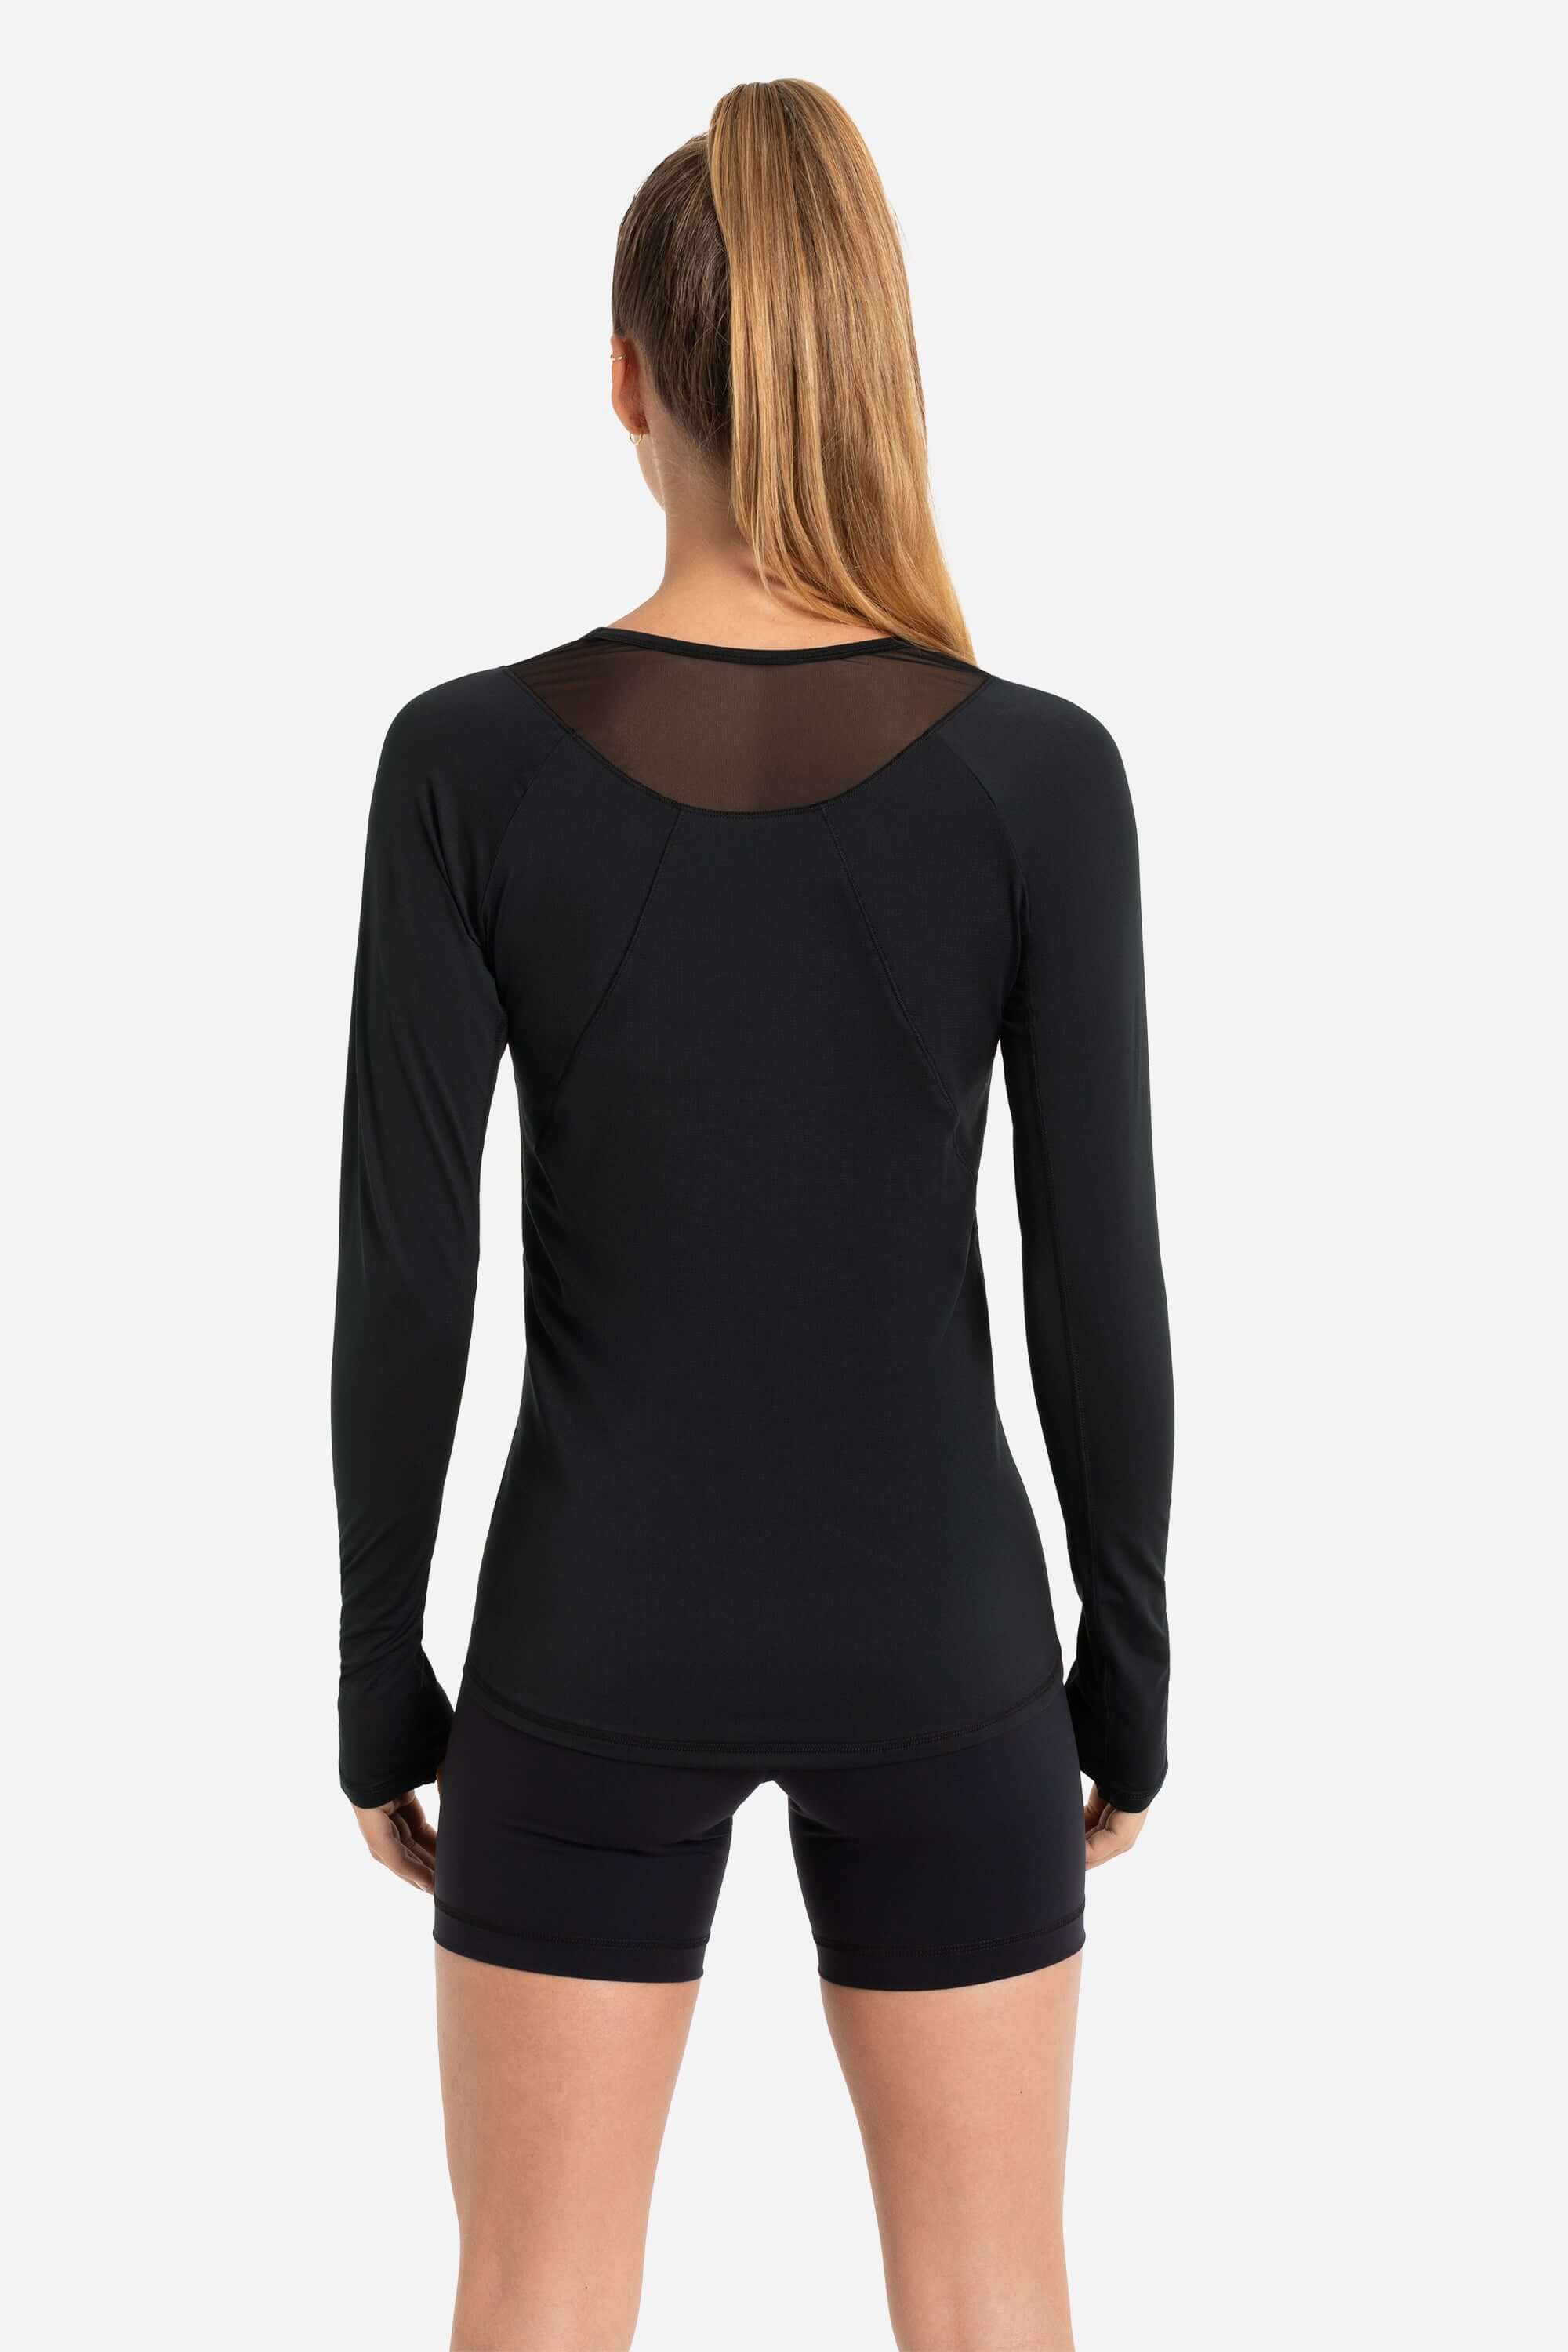 Women in a black long sleeve workout t-shirt with black short tights